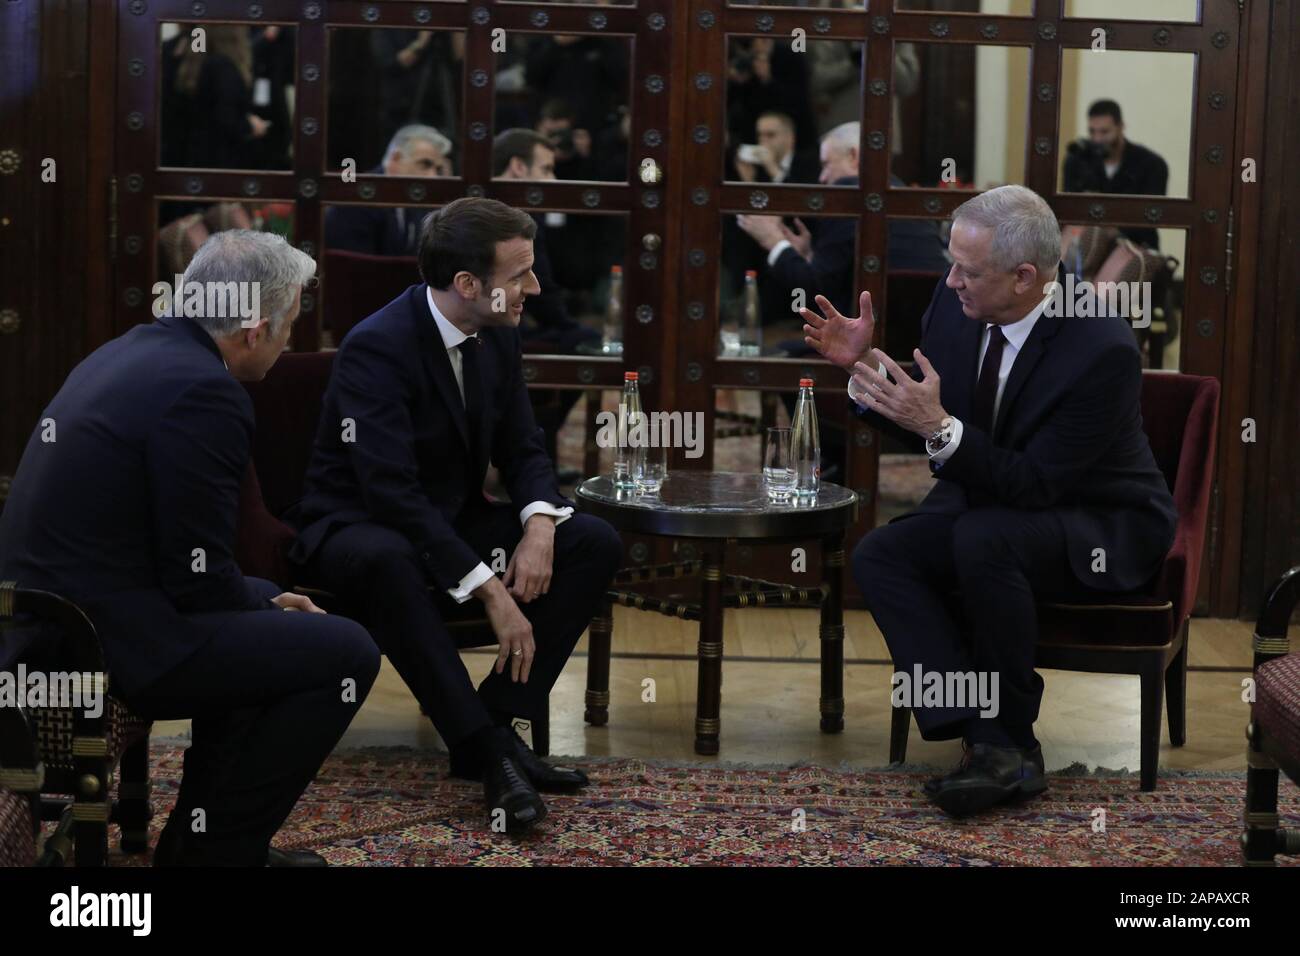 Jerusalem, Israel. 22nd Jan, 2020. French President Emmanuel Macron meets with Blue and White Party leaders Benny Gantz and Yair Lapid (L) ahead of the Fifth World Holocaust Forum at the King David hotel in Jerusalem, Israel, on Wednesday, January 22, 2020. Macron is on a two trip to Israel and the West Bank to discuss the Iran tensions and the Palestinian peace process. Pool Photo by Abil Sultan/UPI Credit: UPI/Alamy Live News Stock Photo